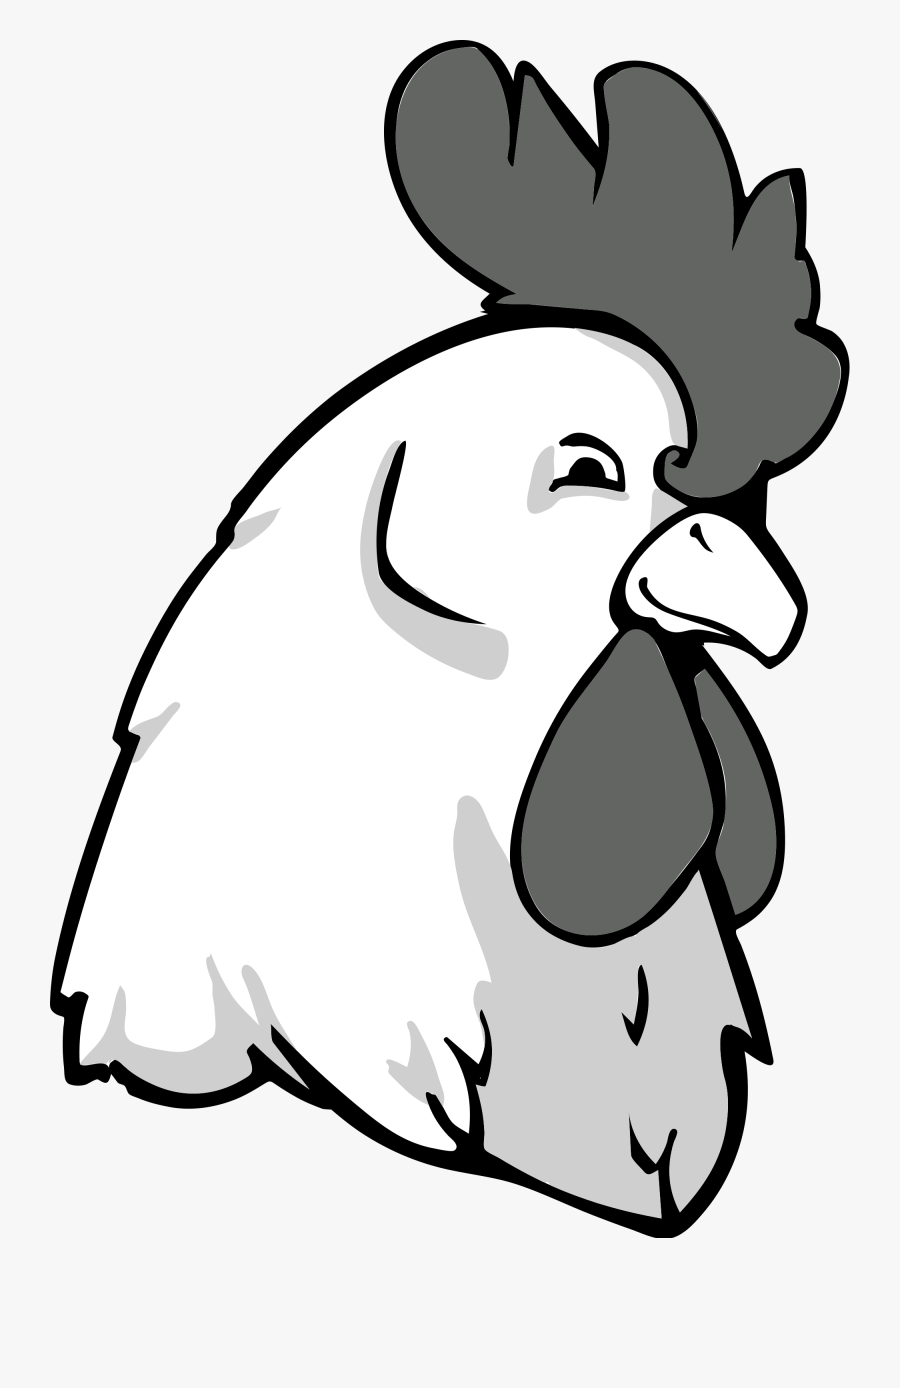 Rooster Bw - Rooster Head Clipart Black And White, Transparent Clipart